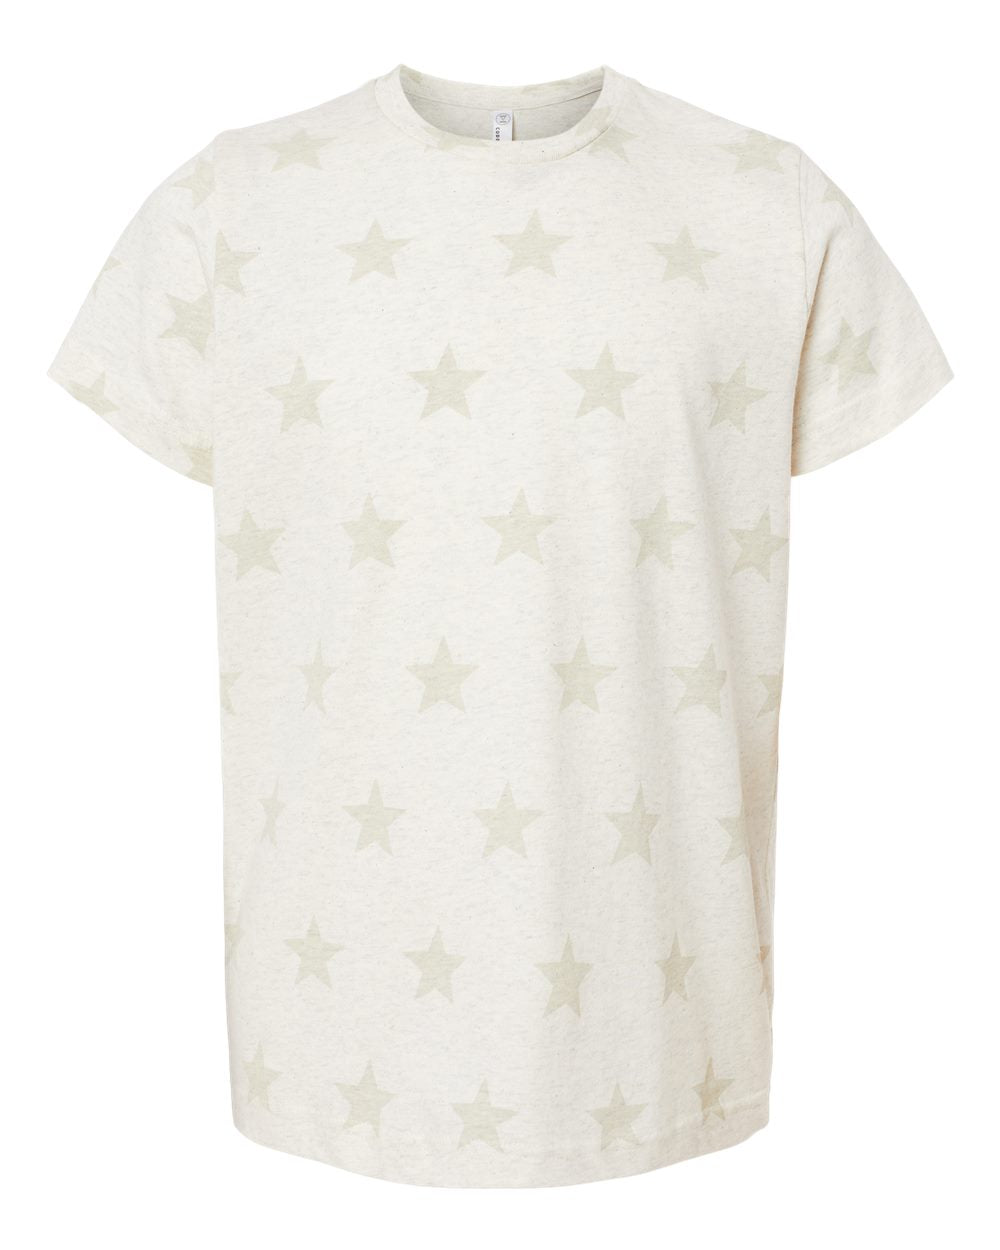 Code Five 2229 Youth Tee - Natural Heather Star